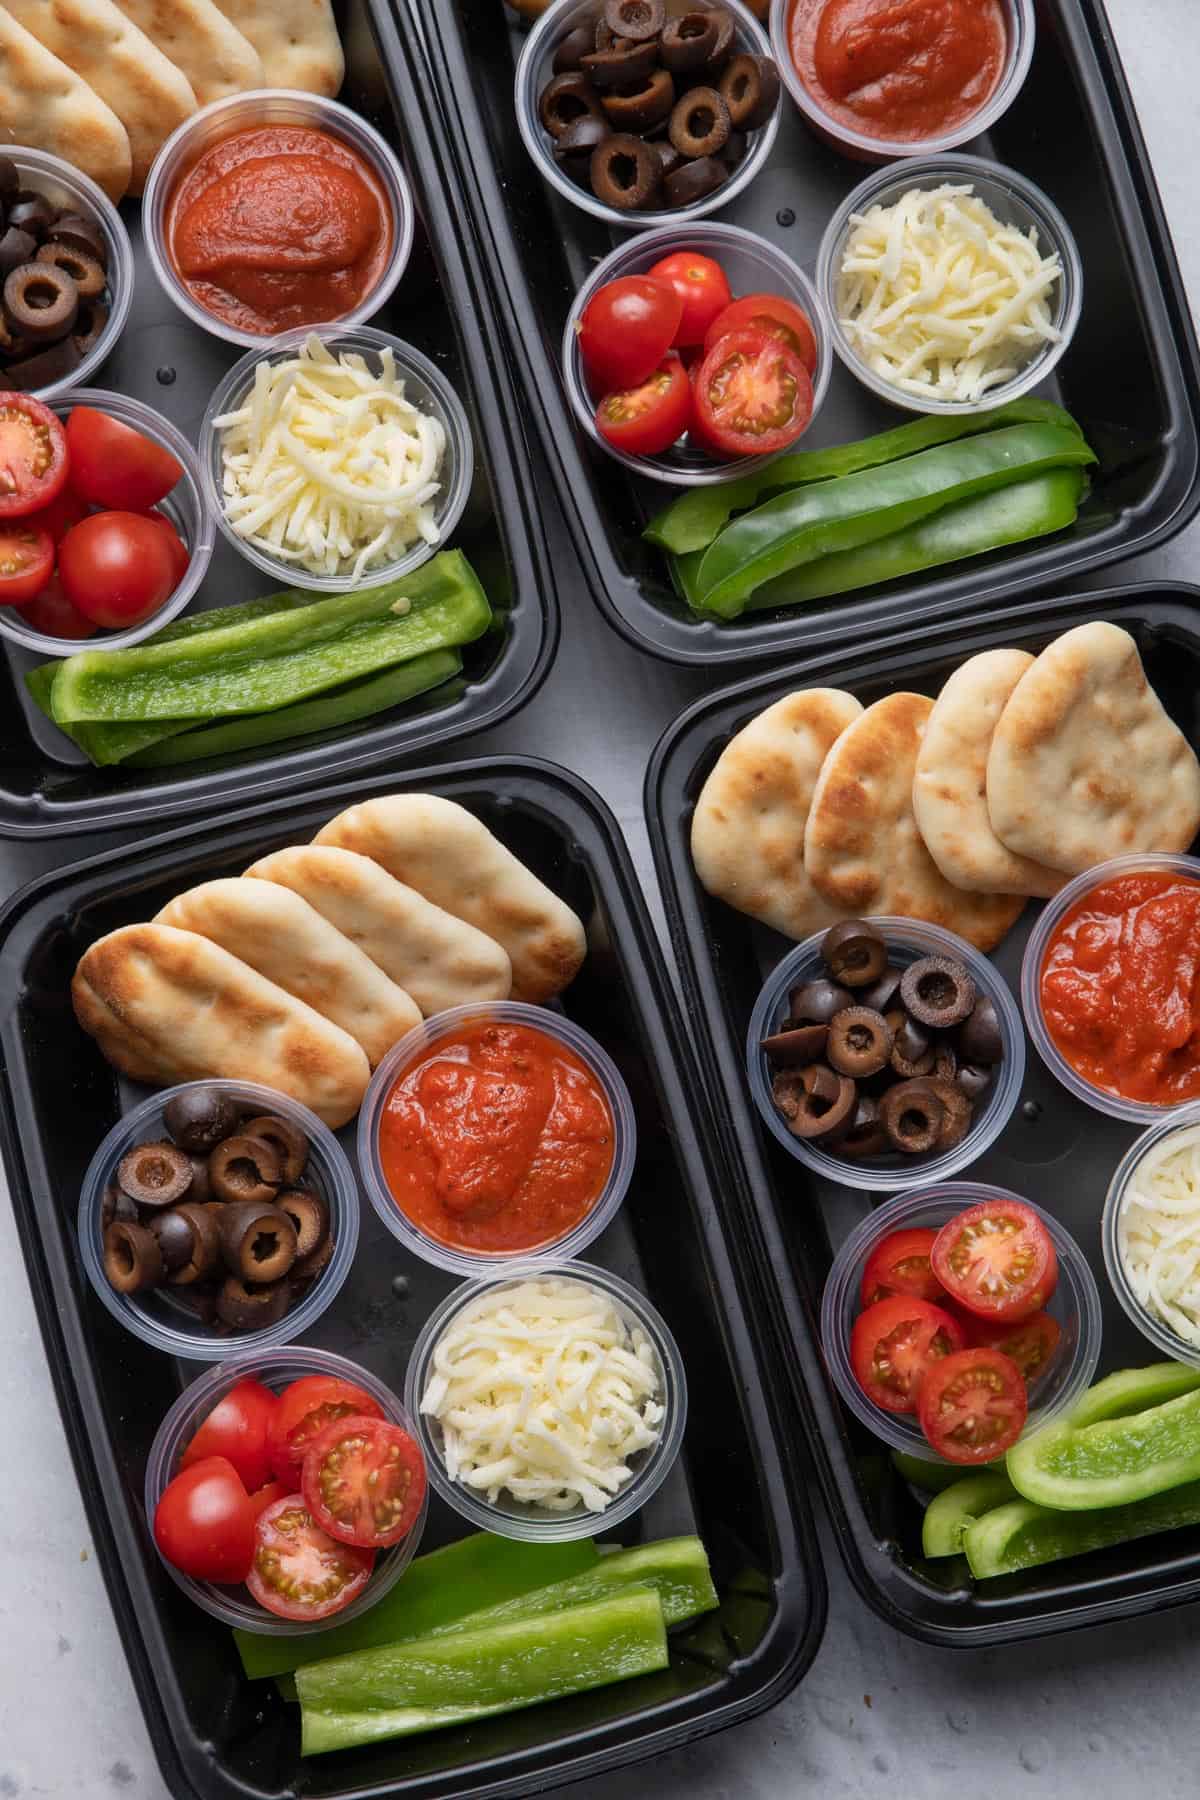 DIY Pizza lunchable meal prep with sauce, cheese, tomatoes, olives and peppers